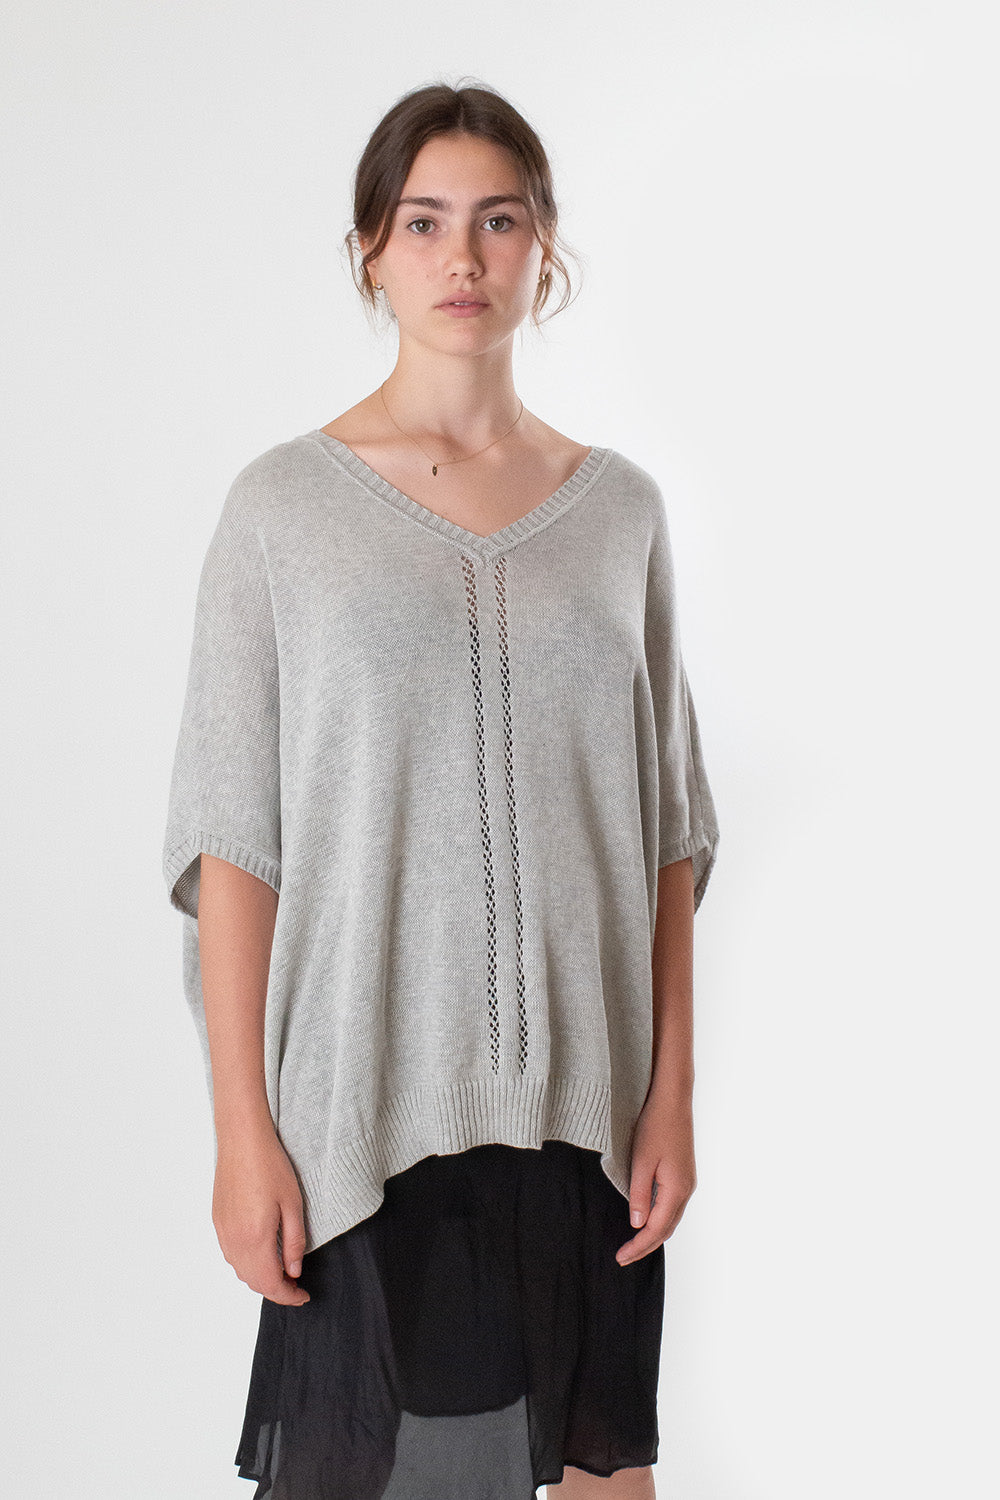 Pima Cotton V Neck Cocoon Sweater in Light Grey